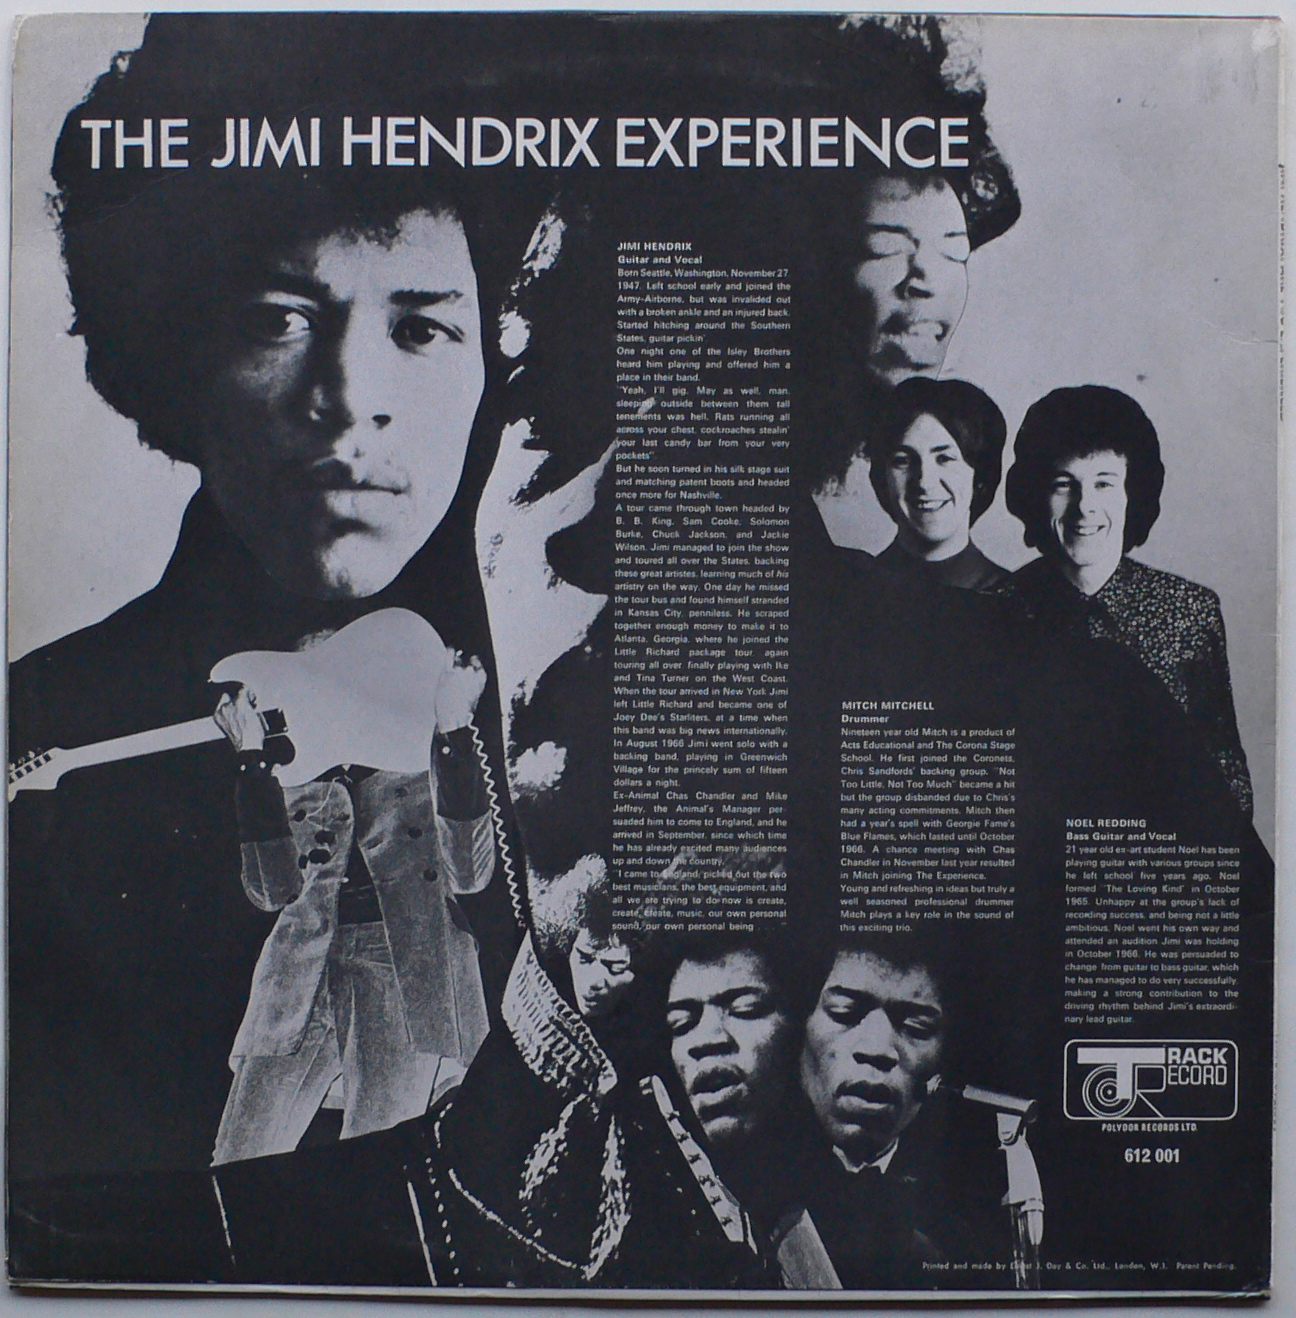 Gigadiscos: The Jimi Hendrix Experience - Are you Experienced? (1967)